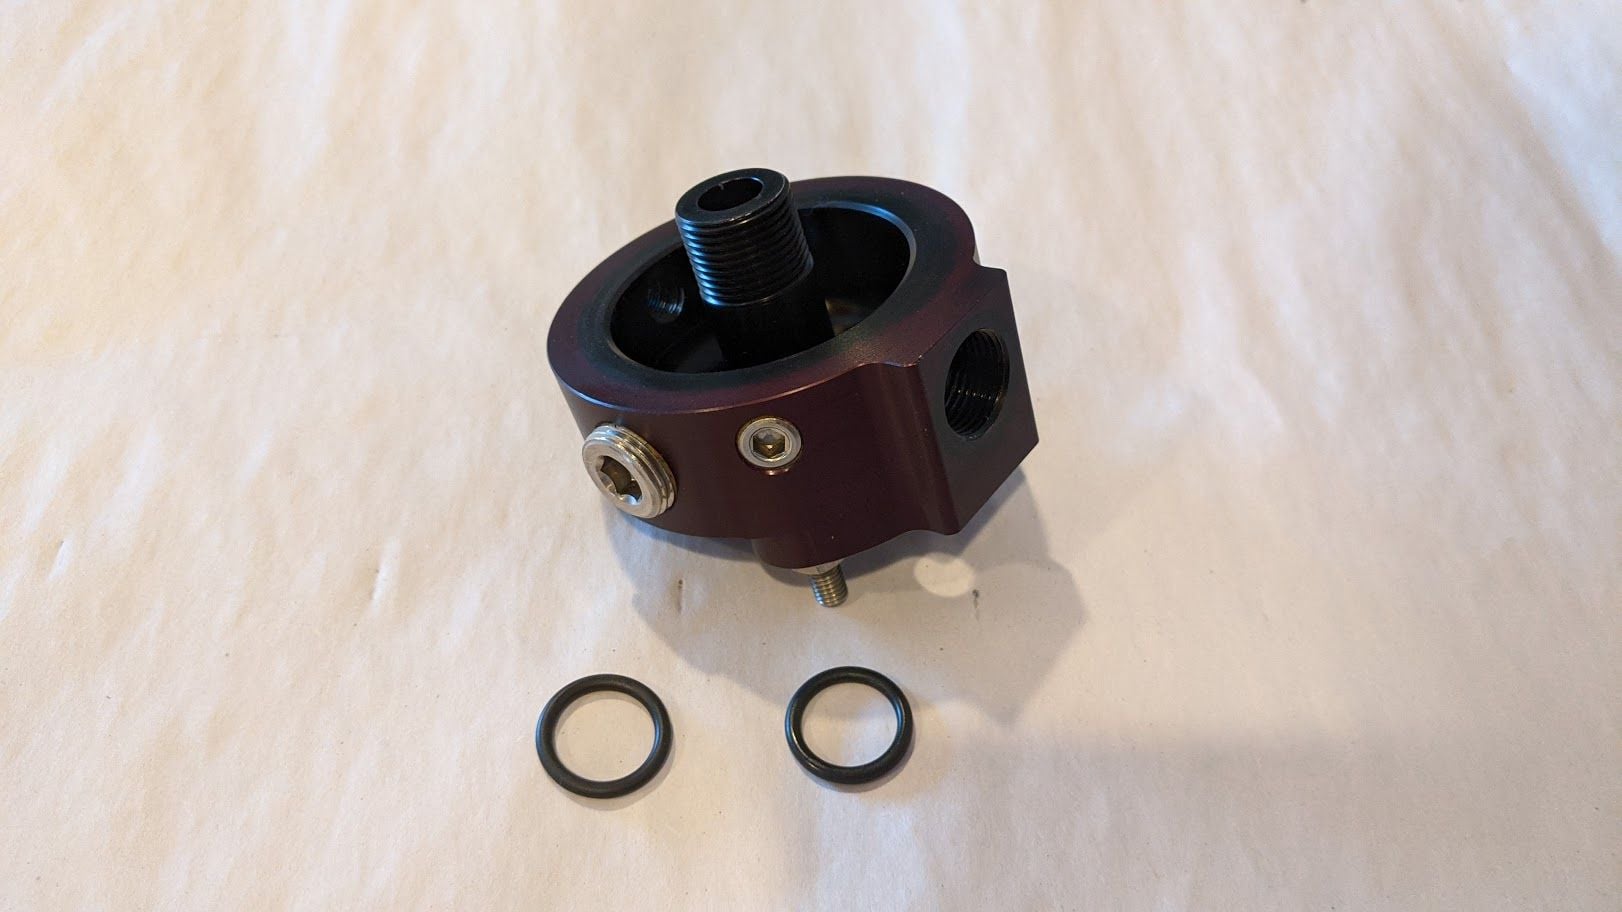 Miscellaneous - SakeBomb Oil Filter Pedestal - Used - 1993 to 2002 Mazda RX-7 - Madison, WI 53703, United States